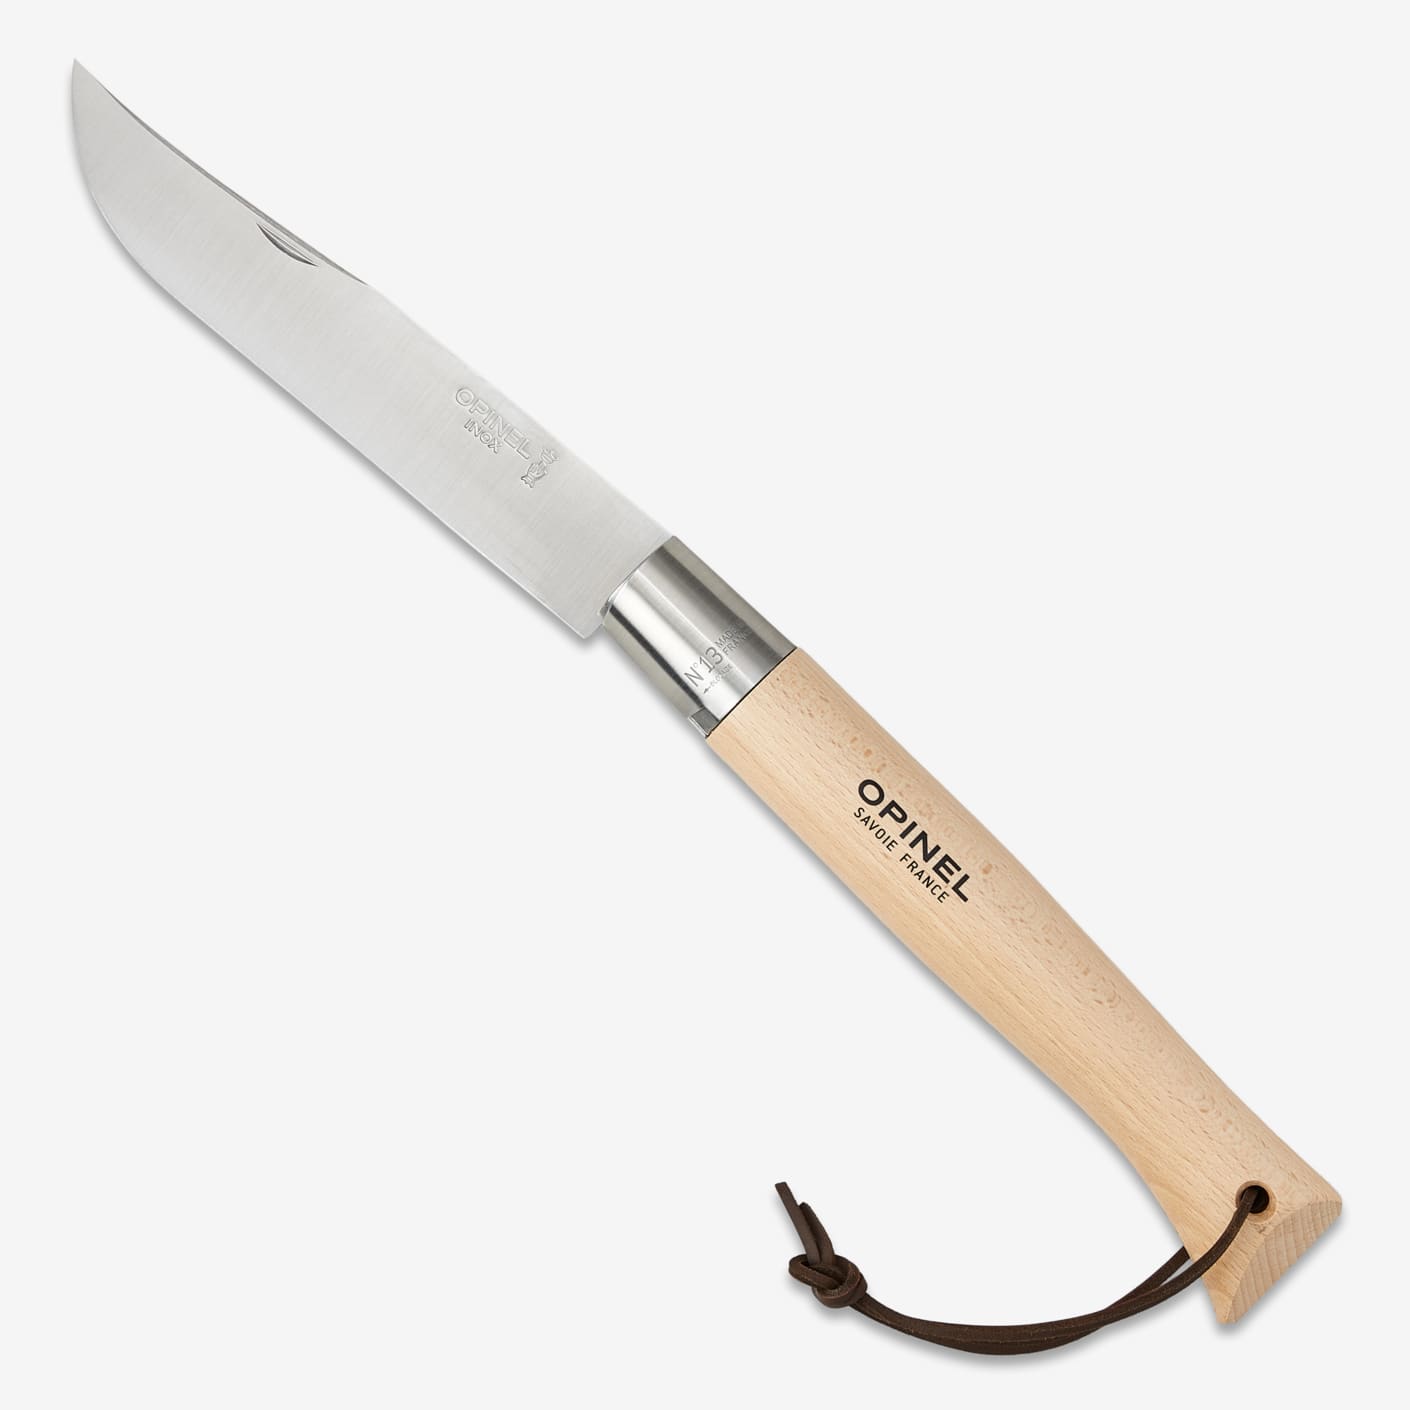 Opinel No.13 Giant Stainless Steel Folding Knife